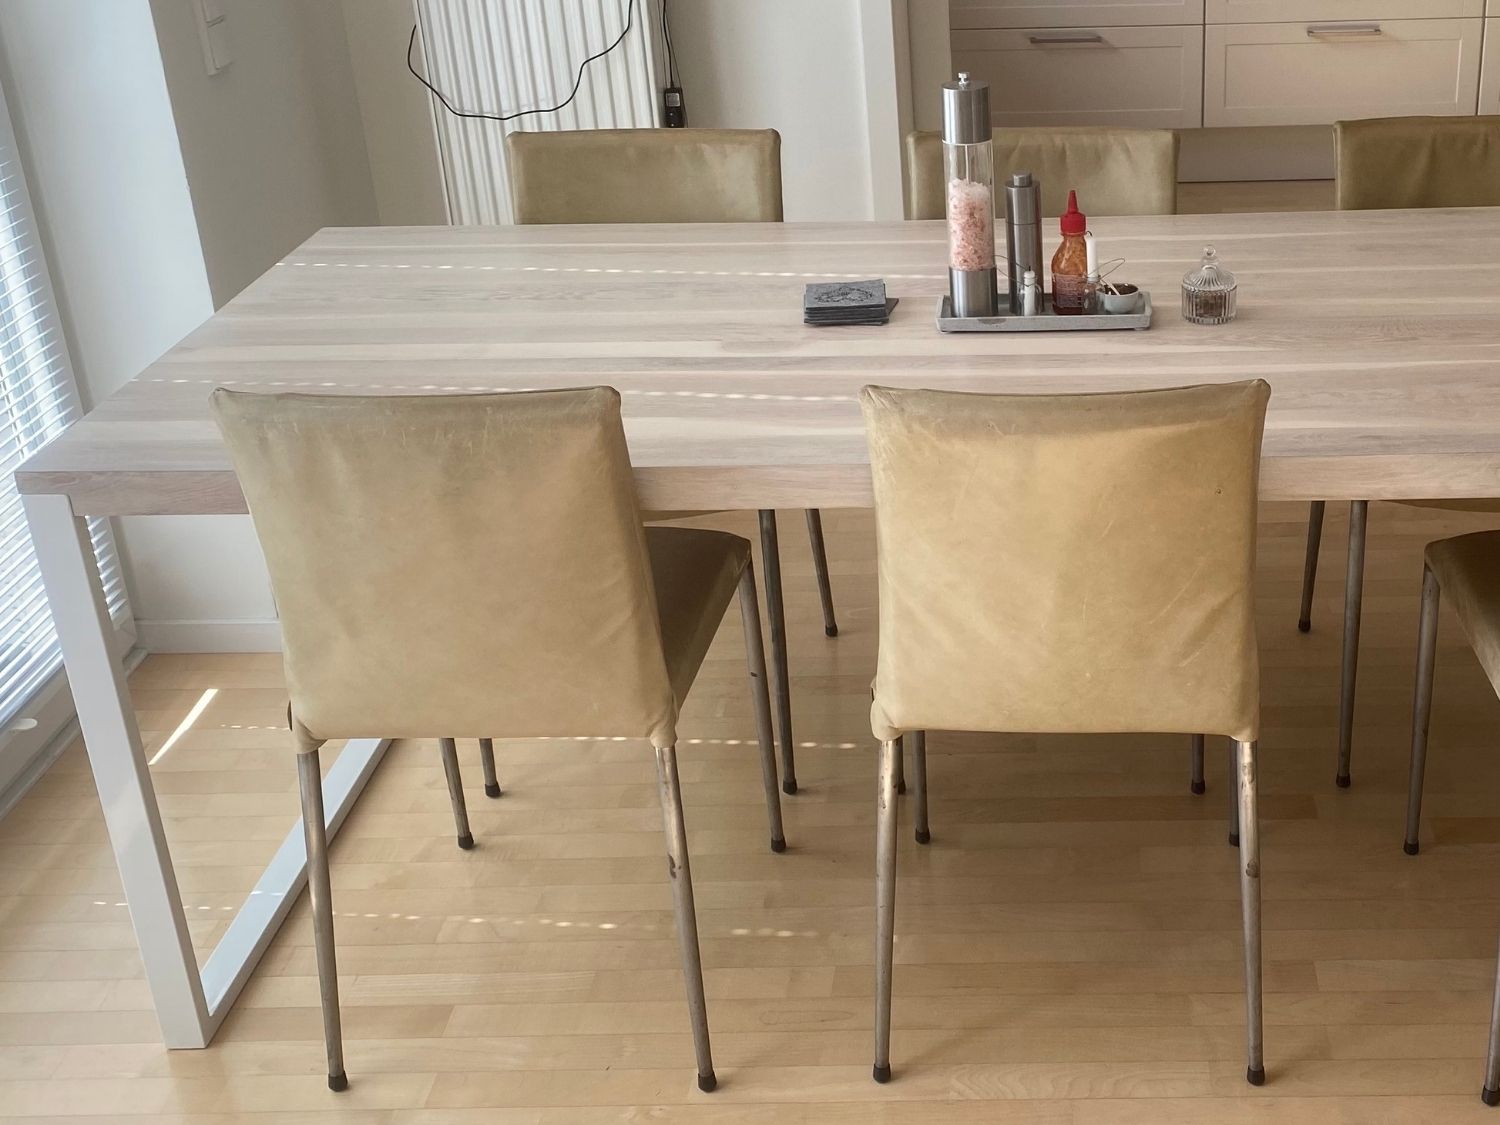 Bleached wood, bespoke modern dining table